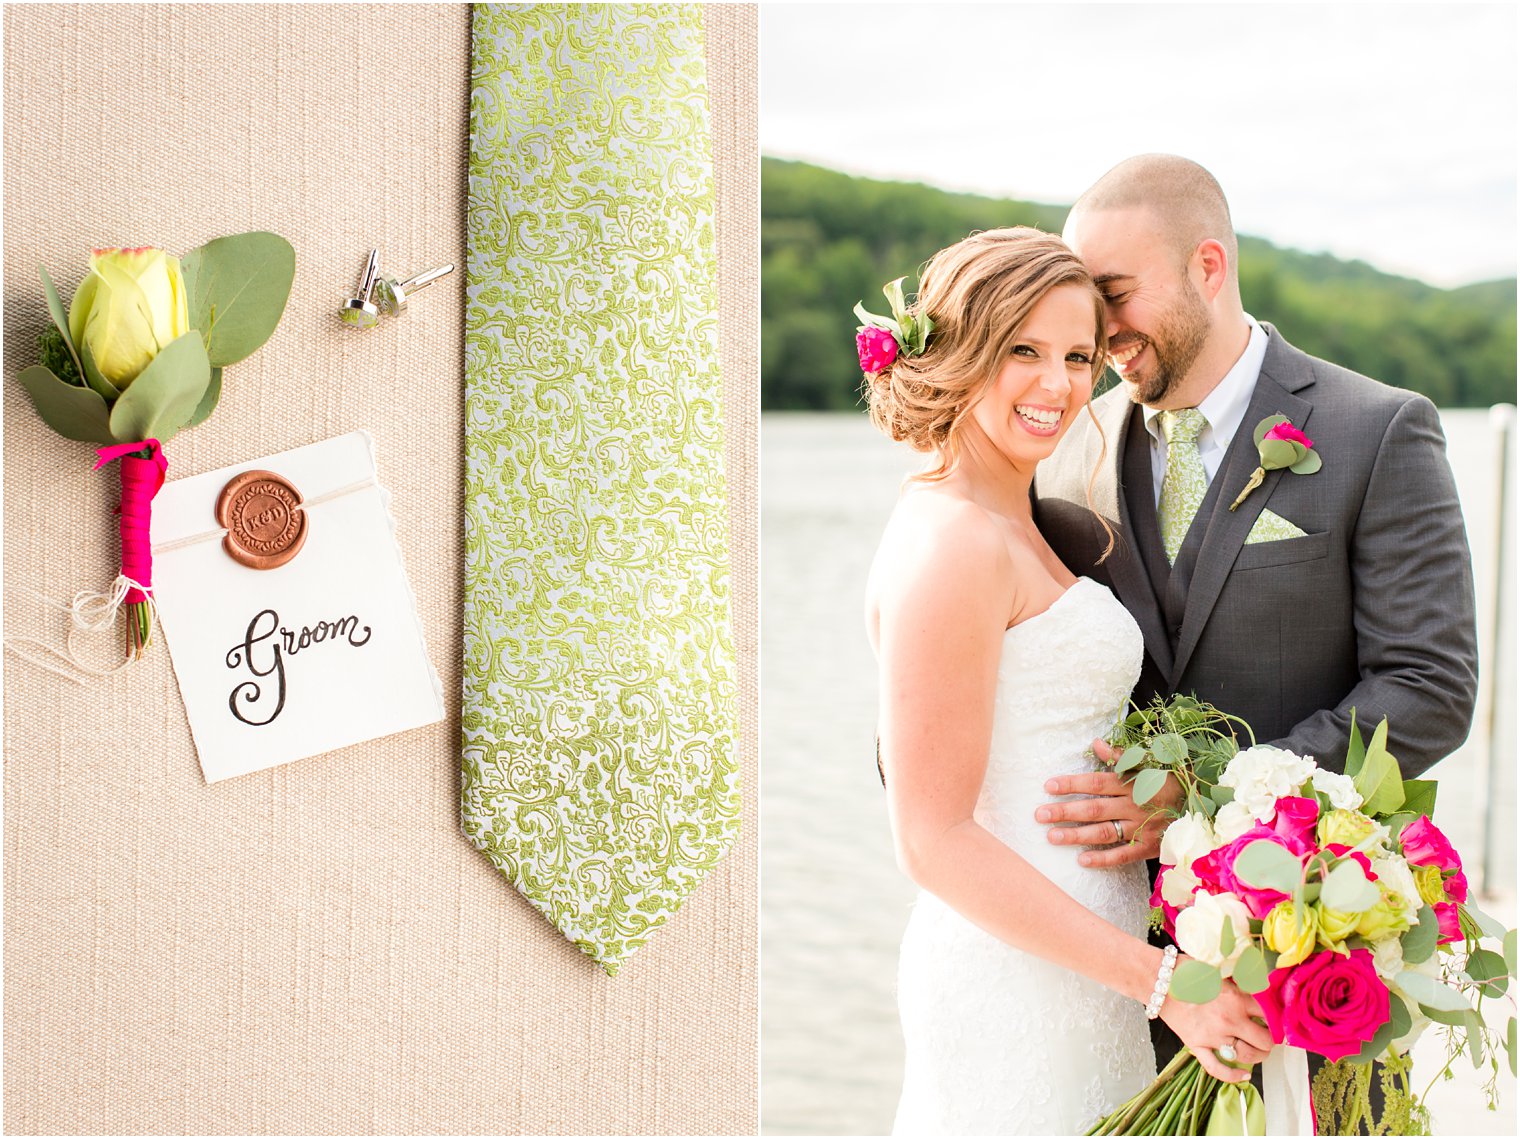 Lakefront NJ Wedding Inspiration Shoot in berry pink and green